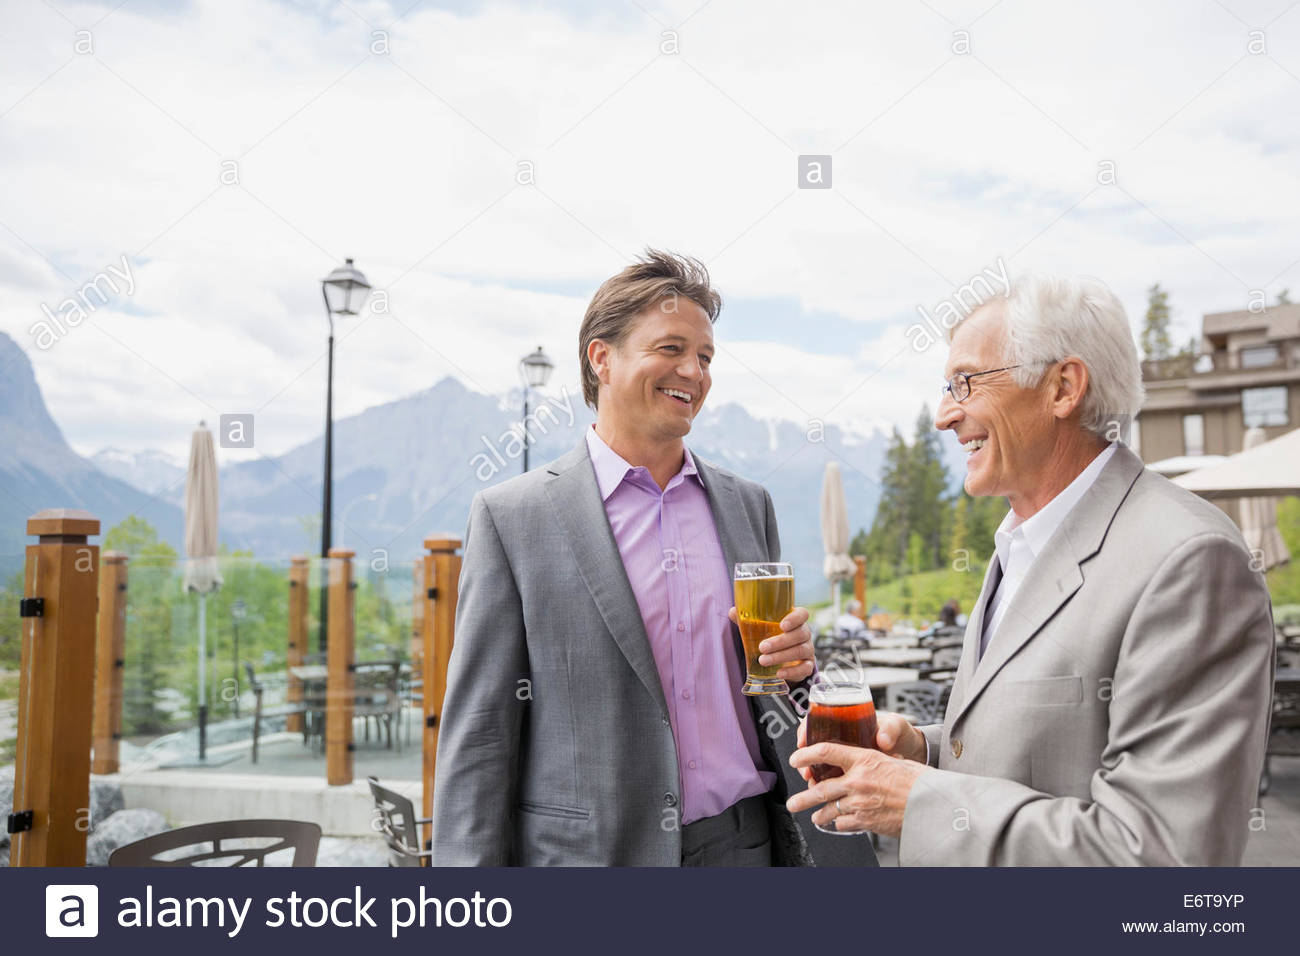 Businessmen talking at networking event Stock Photo